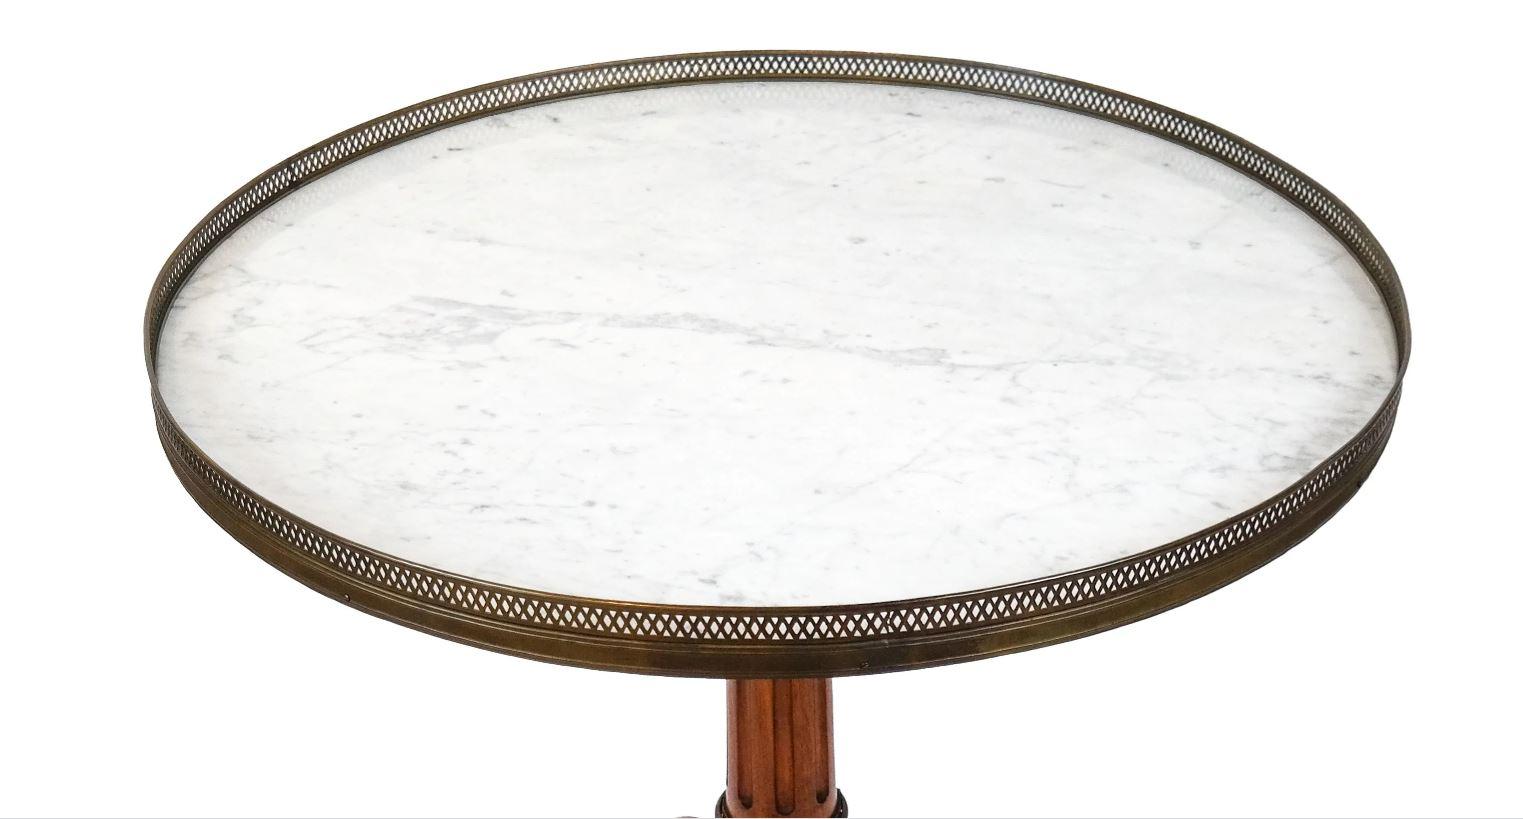 French 19th Century Regency Marble Top Gueridon Table